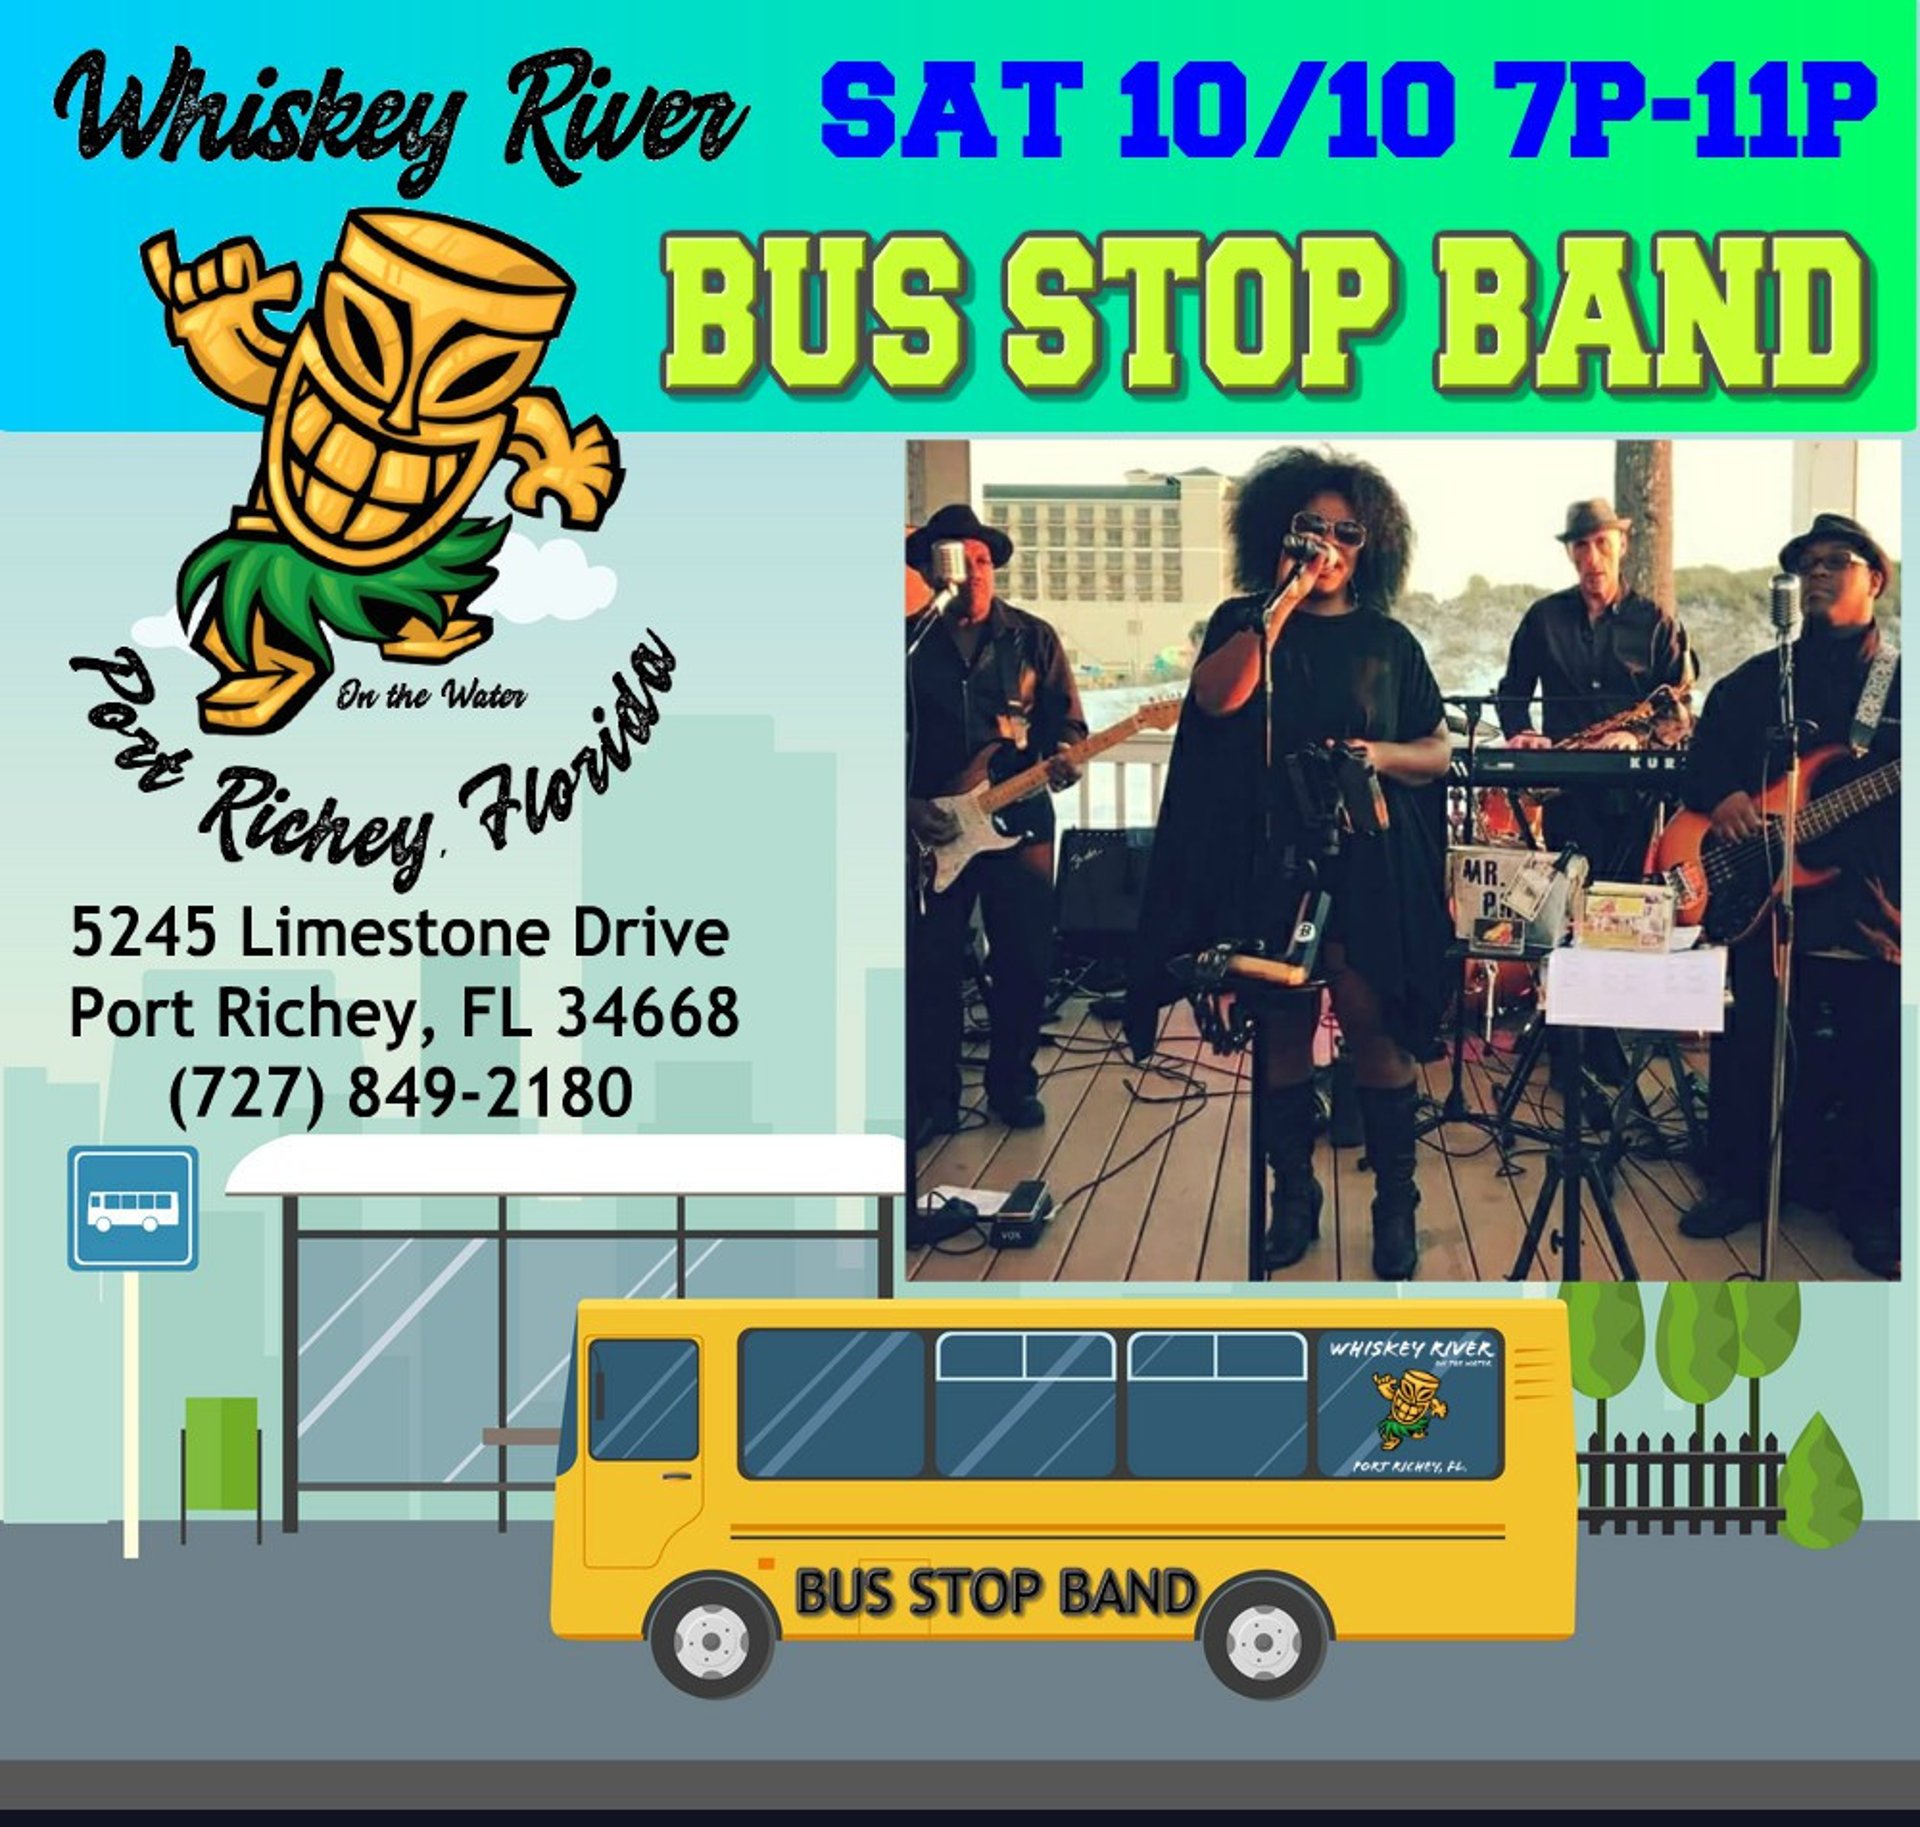 Bus Stop Band Concert / Performance in Port Richey, FL The Vendry